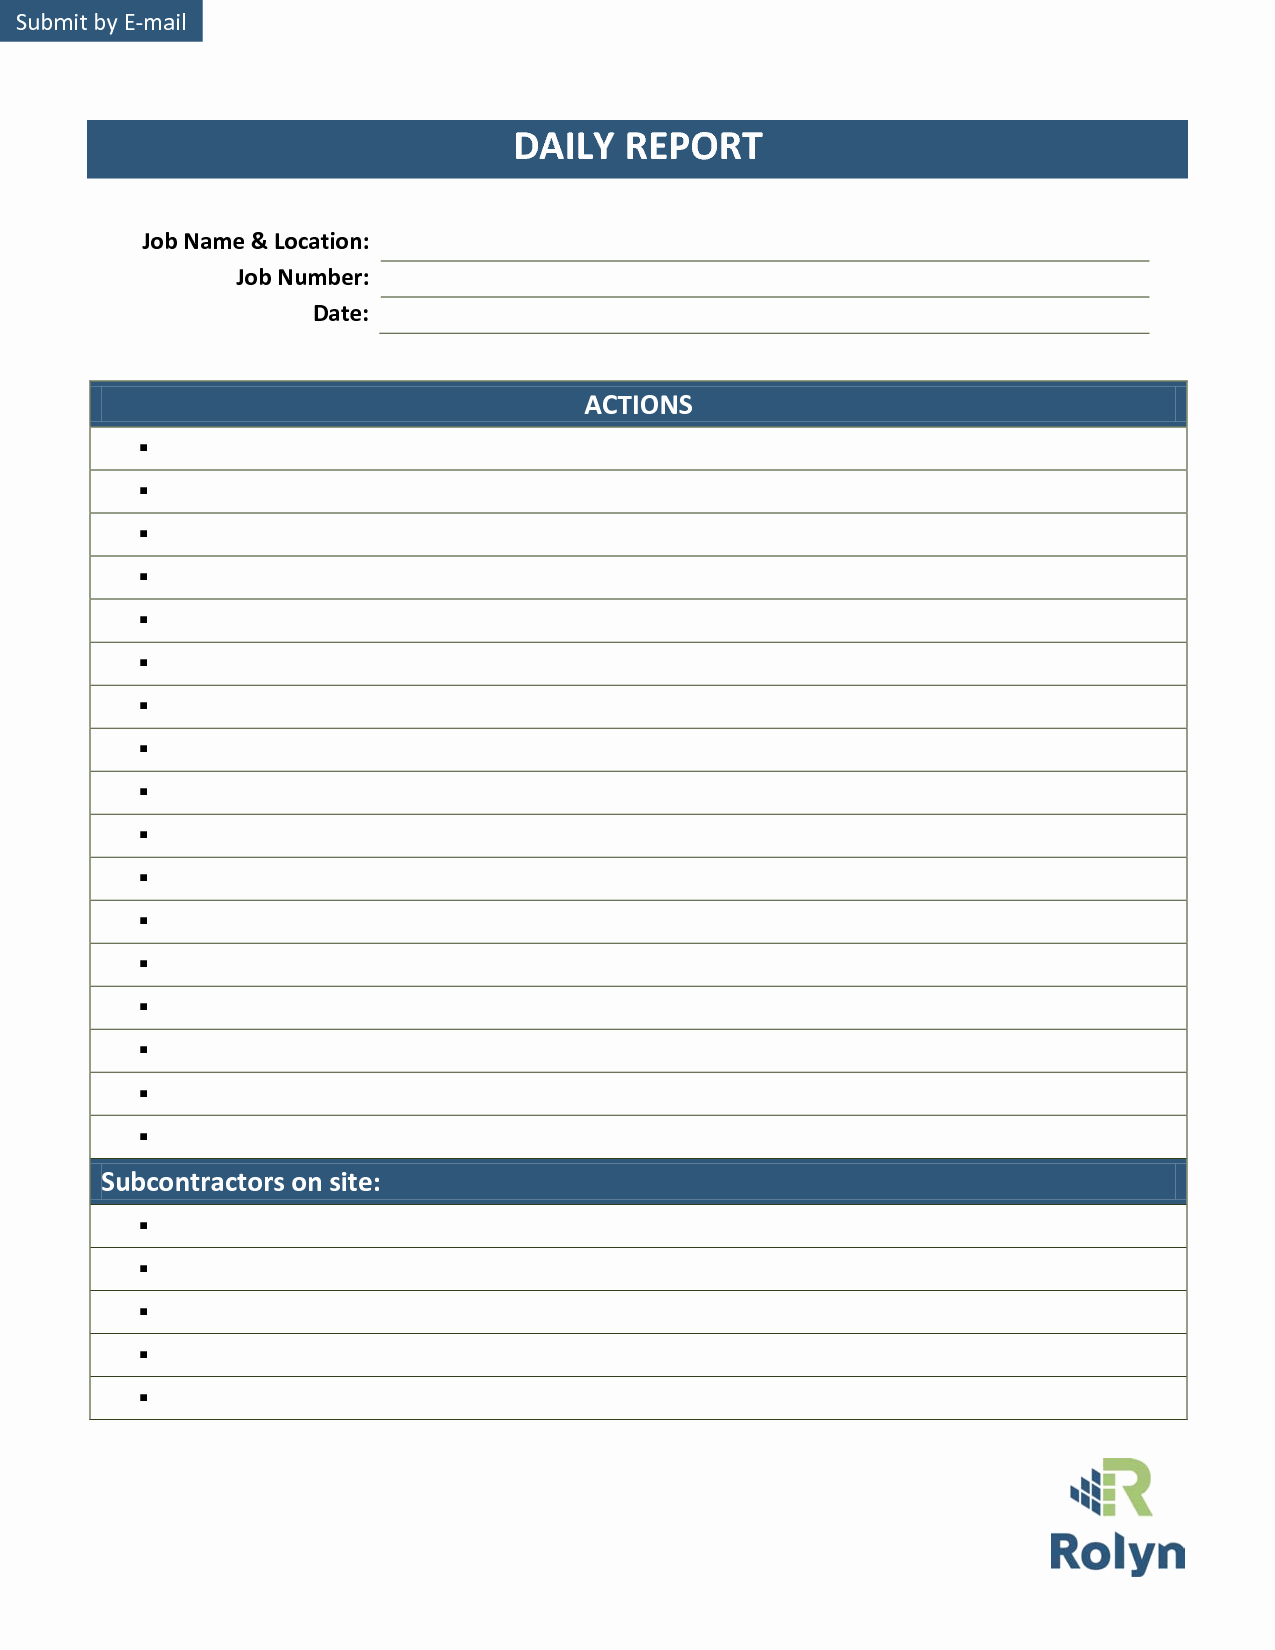 Daily Report Template Word Elegant Effective Daily Report Template with Lists Action Field